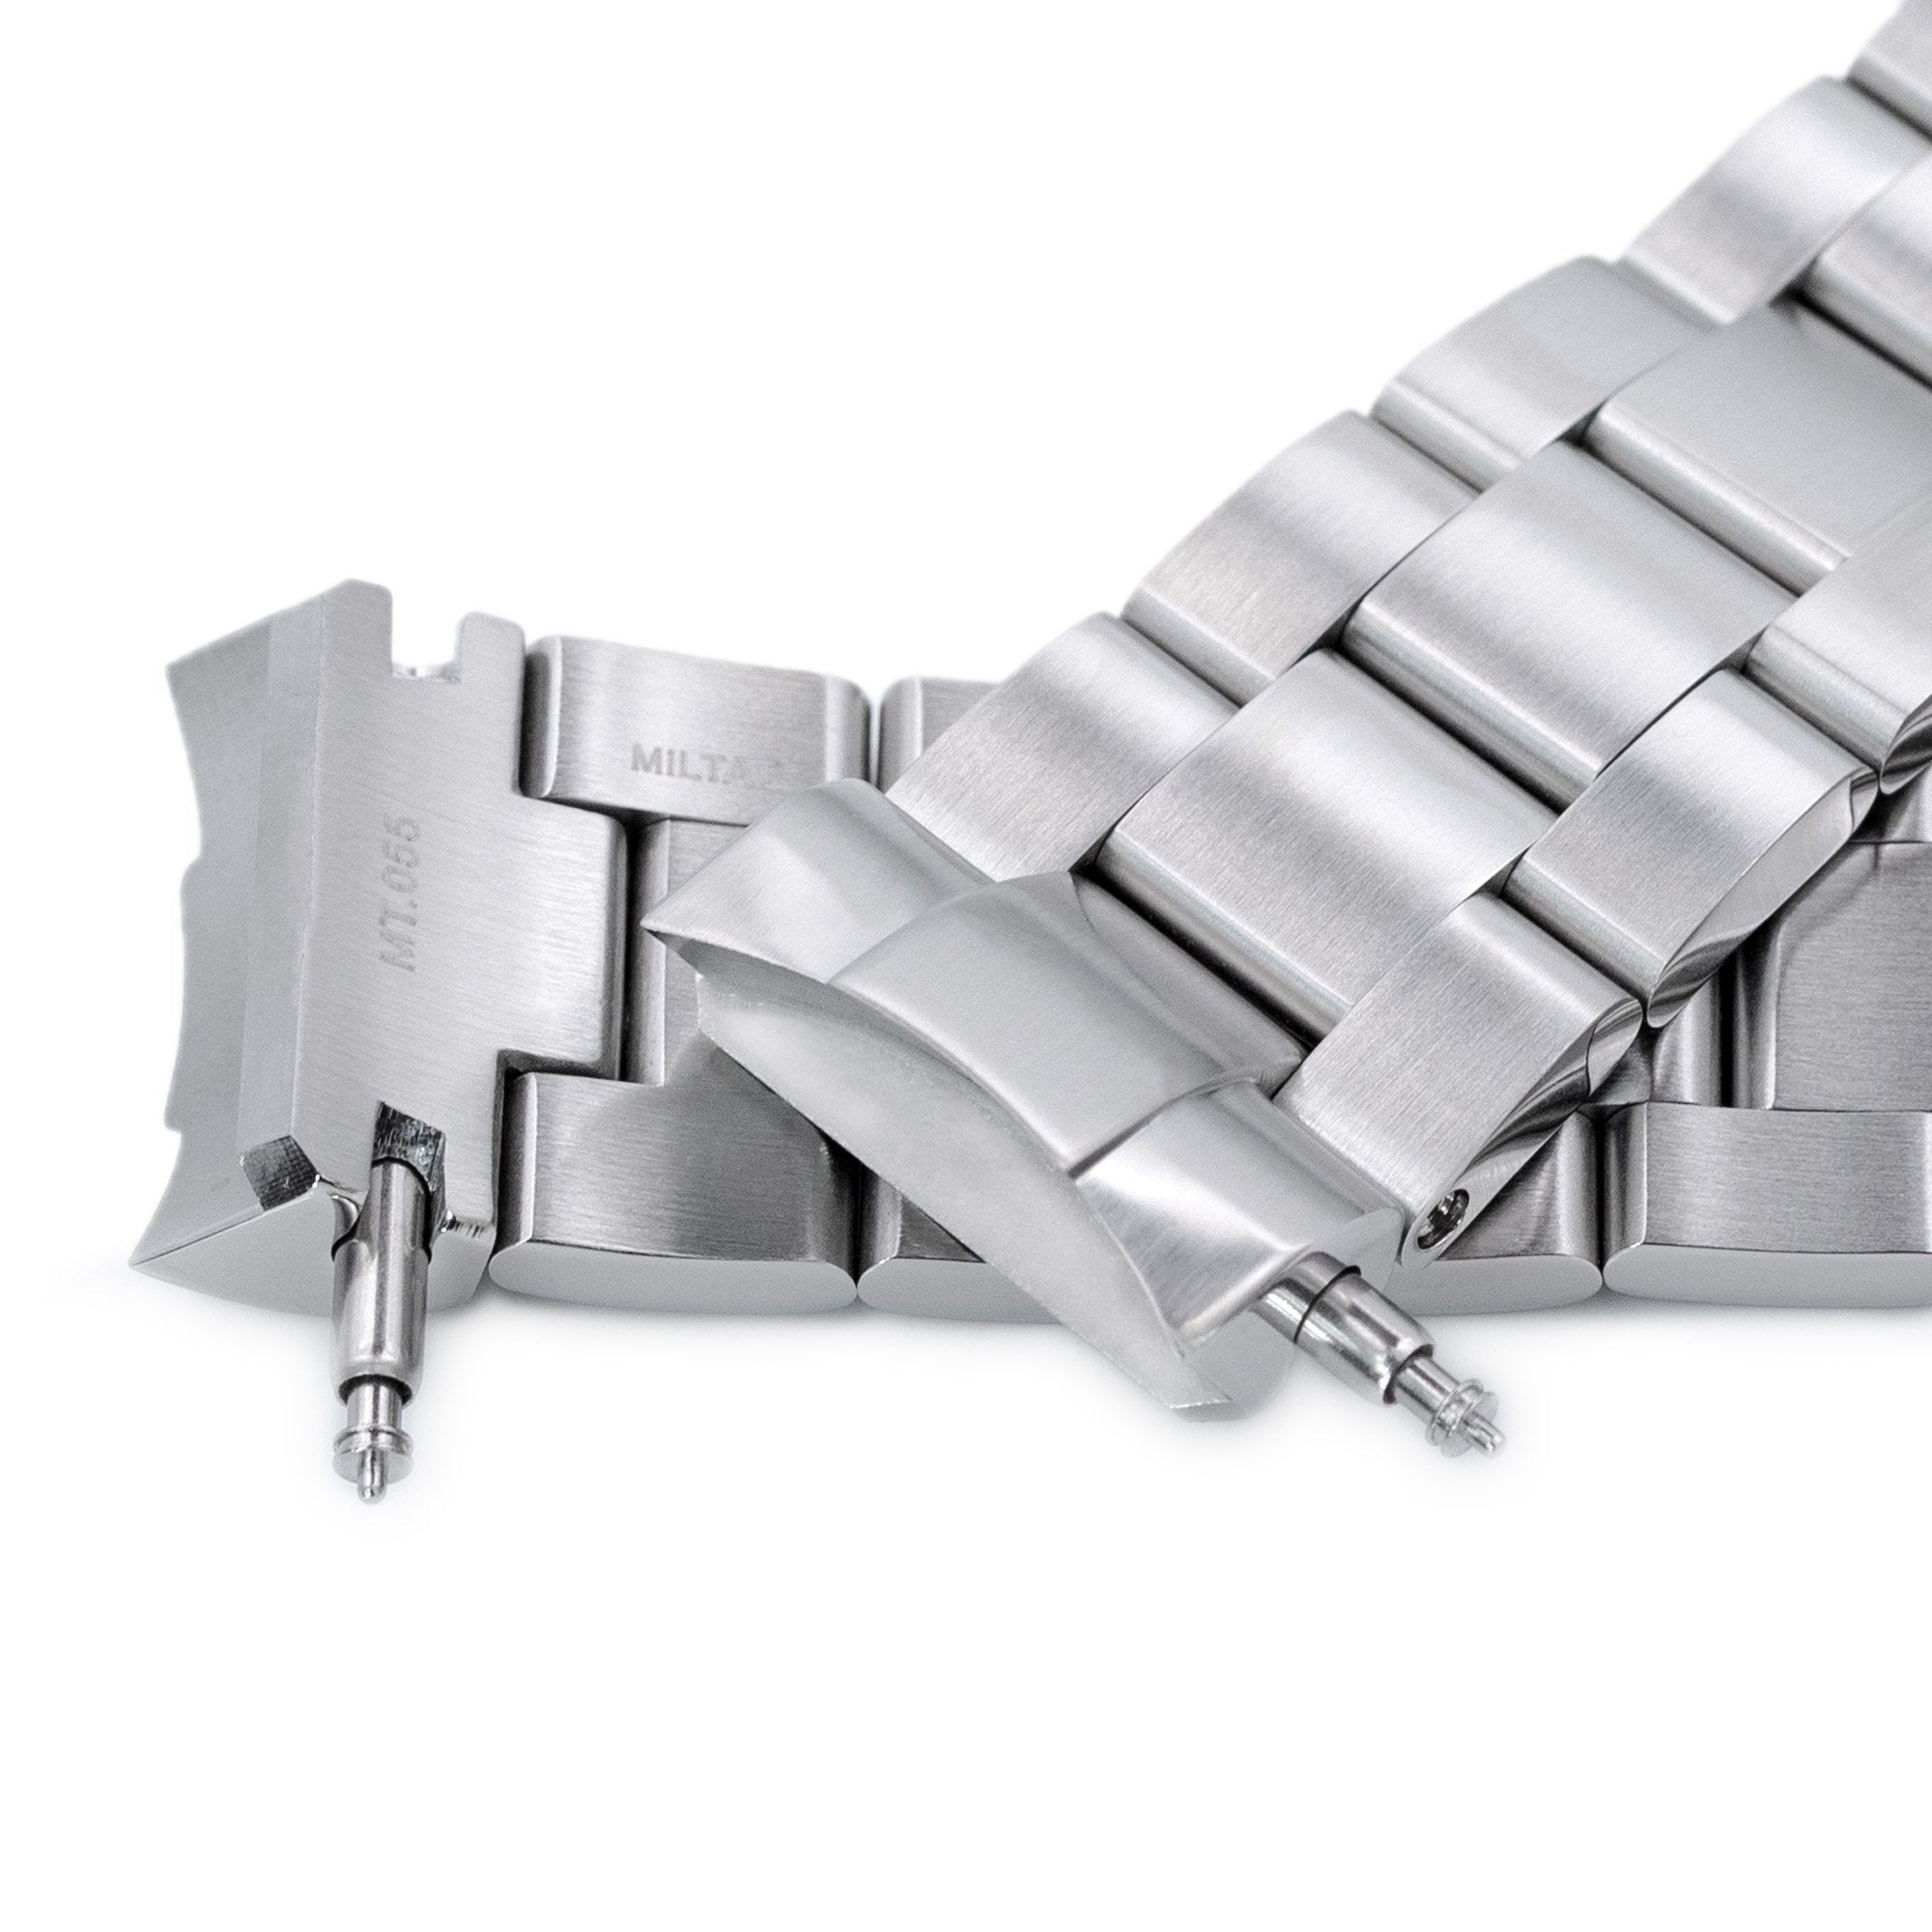 Super-O Boyer watch band for Seiko MM300 Ratchet Buckle – Russell Jewellers